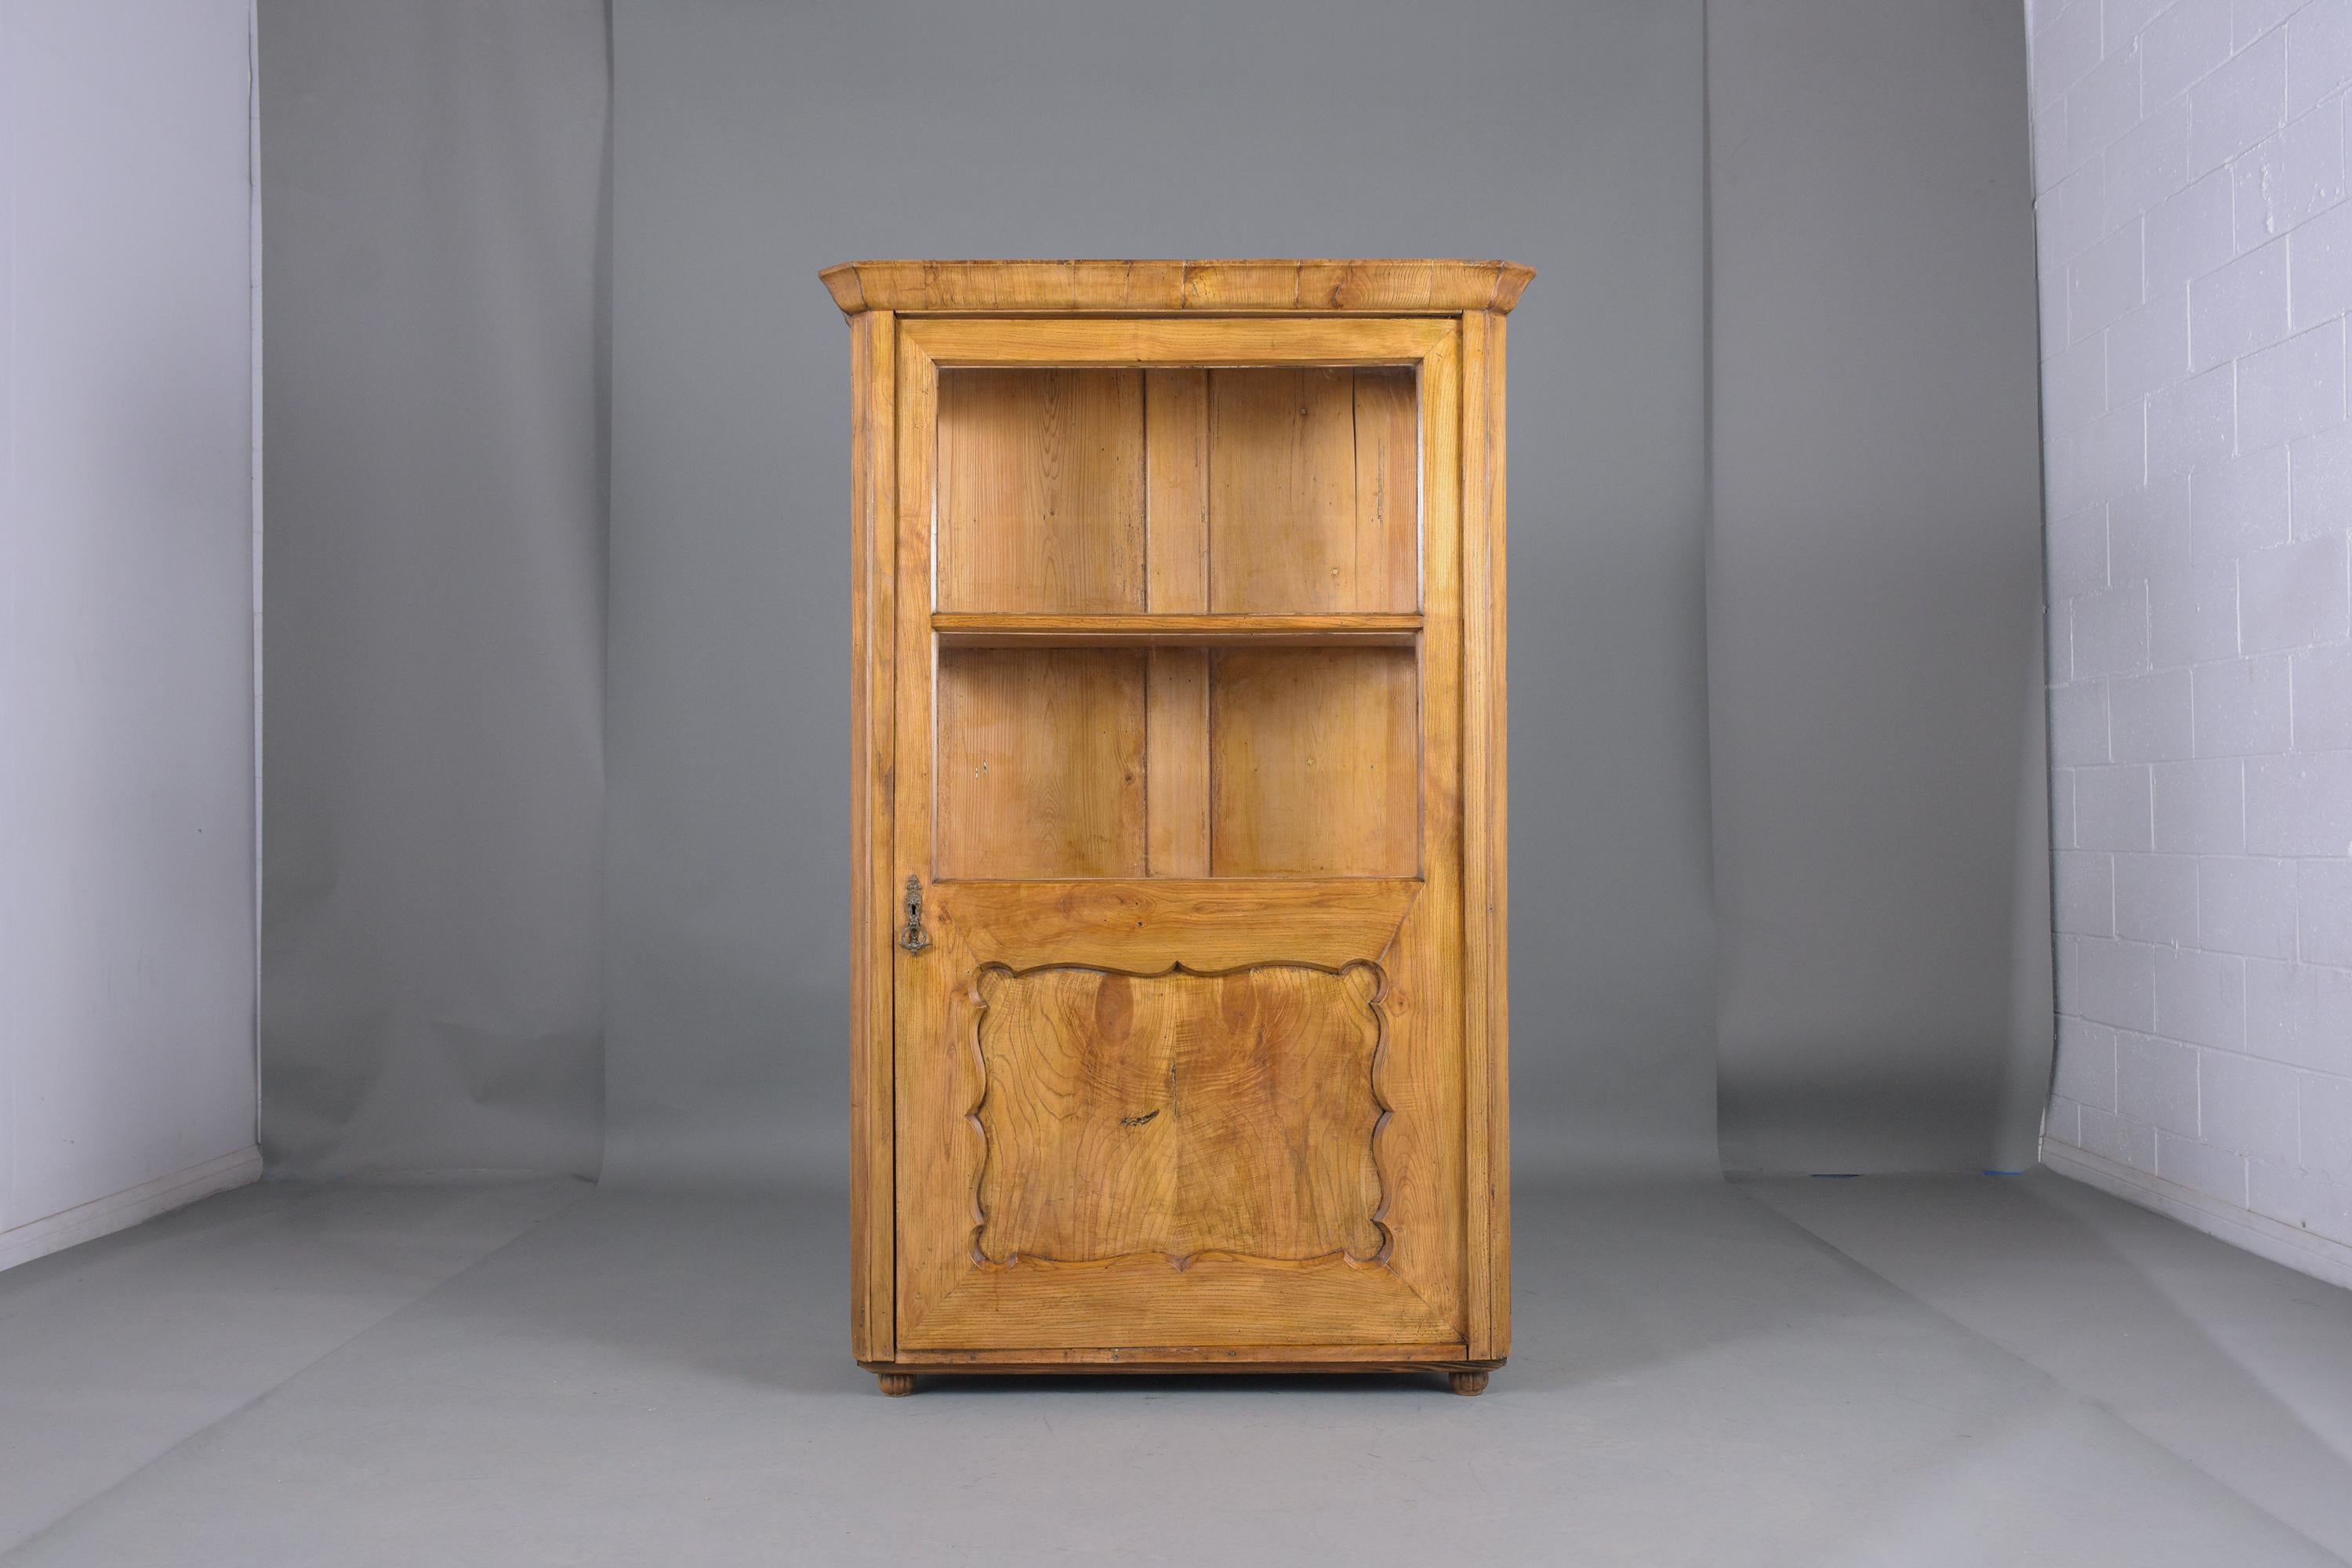 Immerse yourself in the rich history and craftsmanship of our 19th-century Walnut Wood Bookcase, a piece that has been meticulously restored and handcrafted. This exquisite single-door bookcase showcases newly shellacked, waxed, and polished